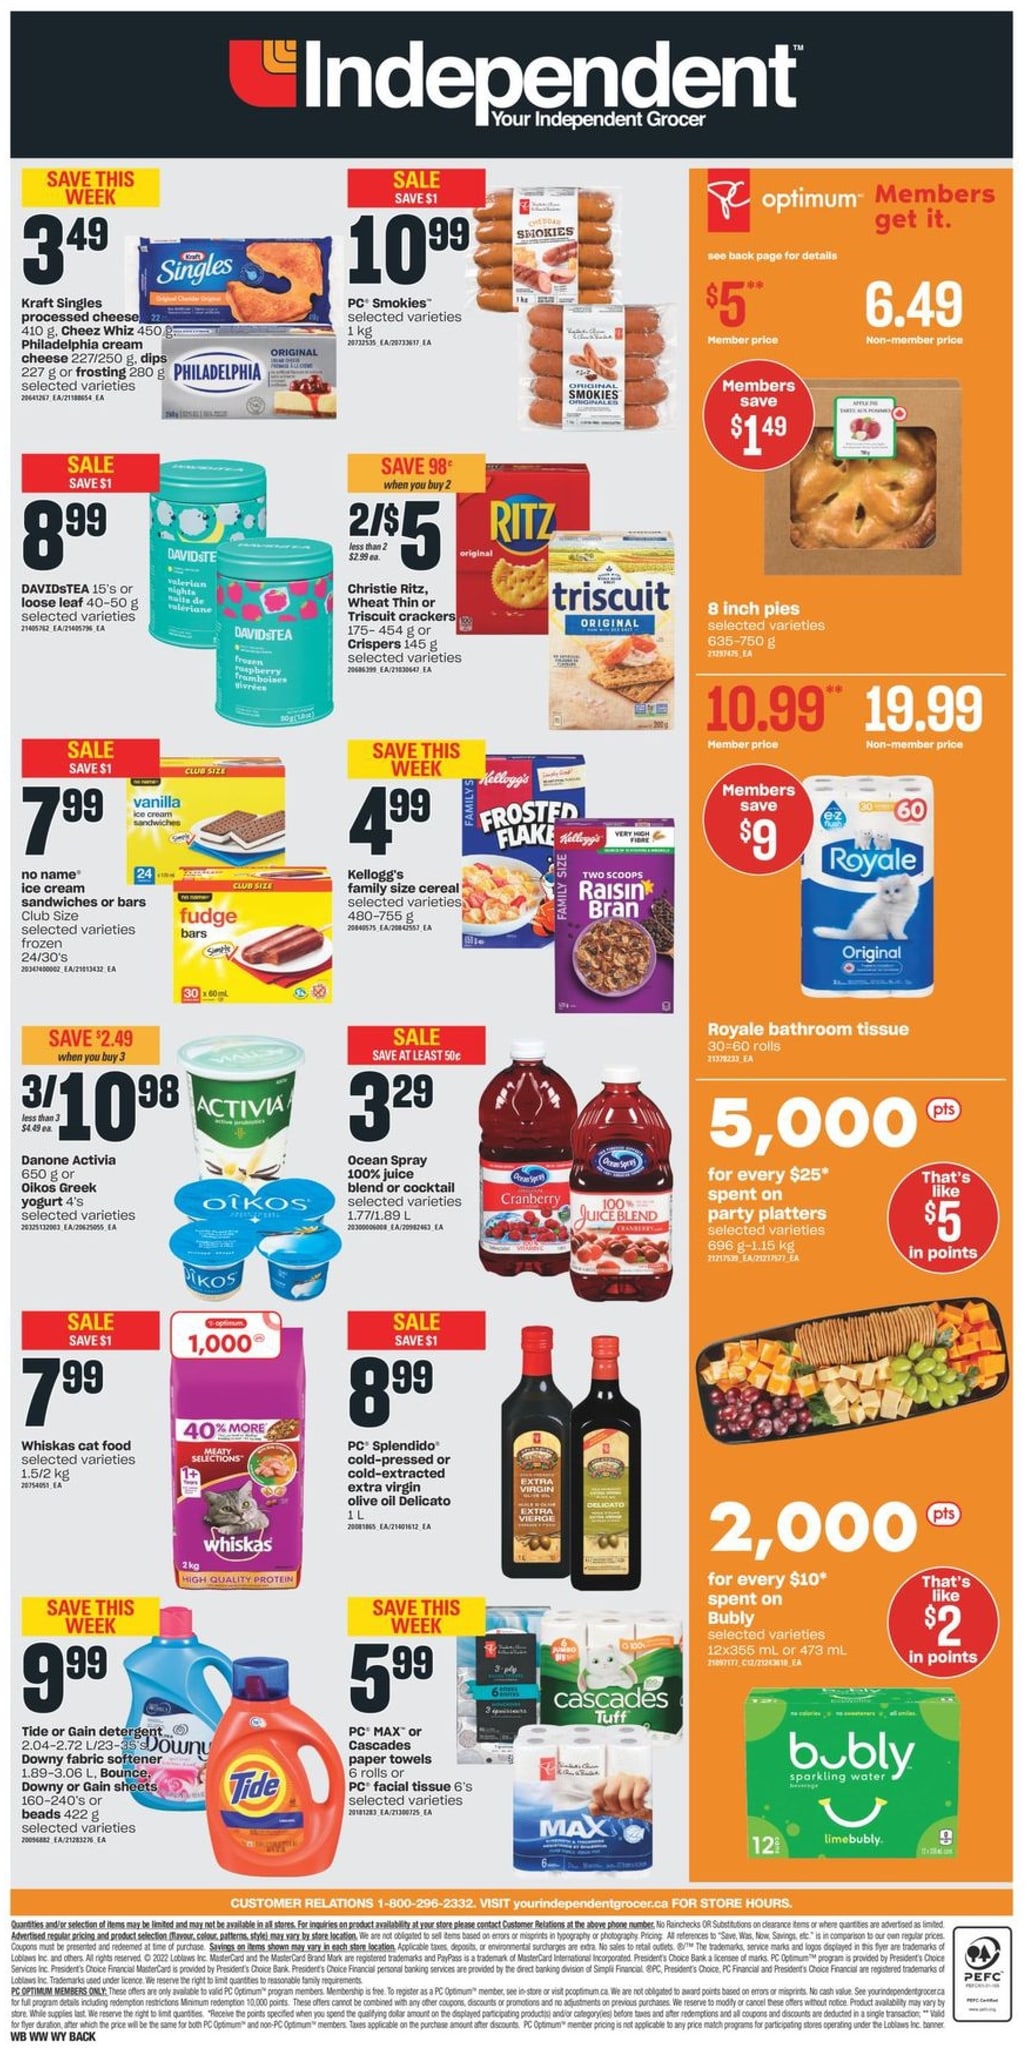 Independent British Columbia - Weekly Flyer Specials - Page 3